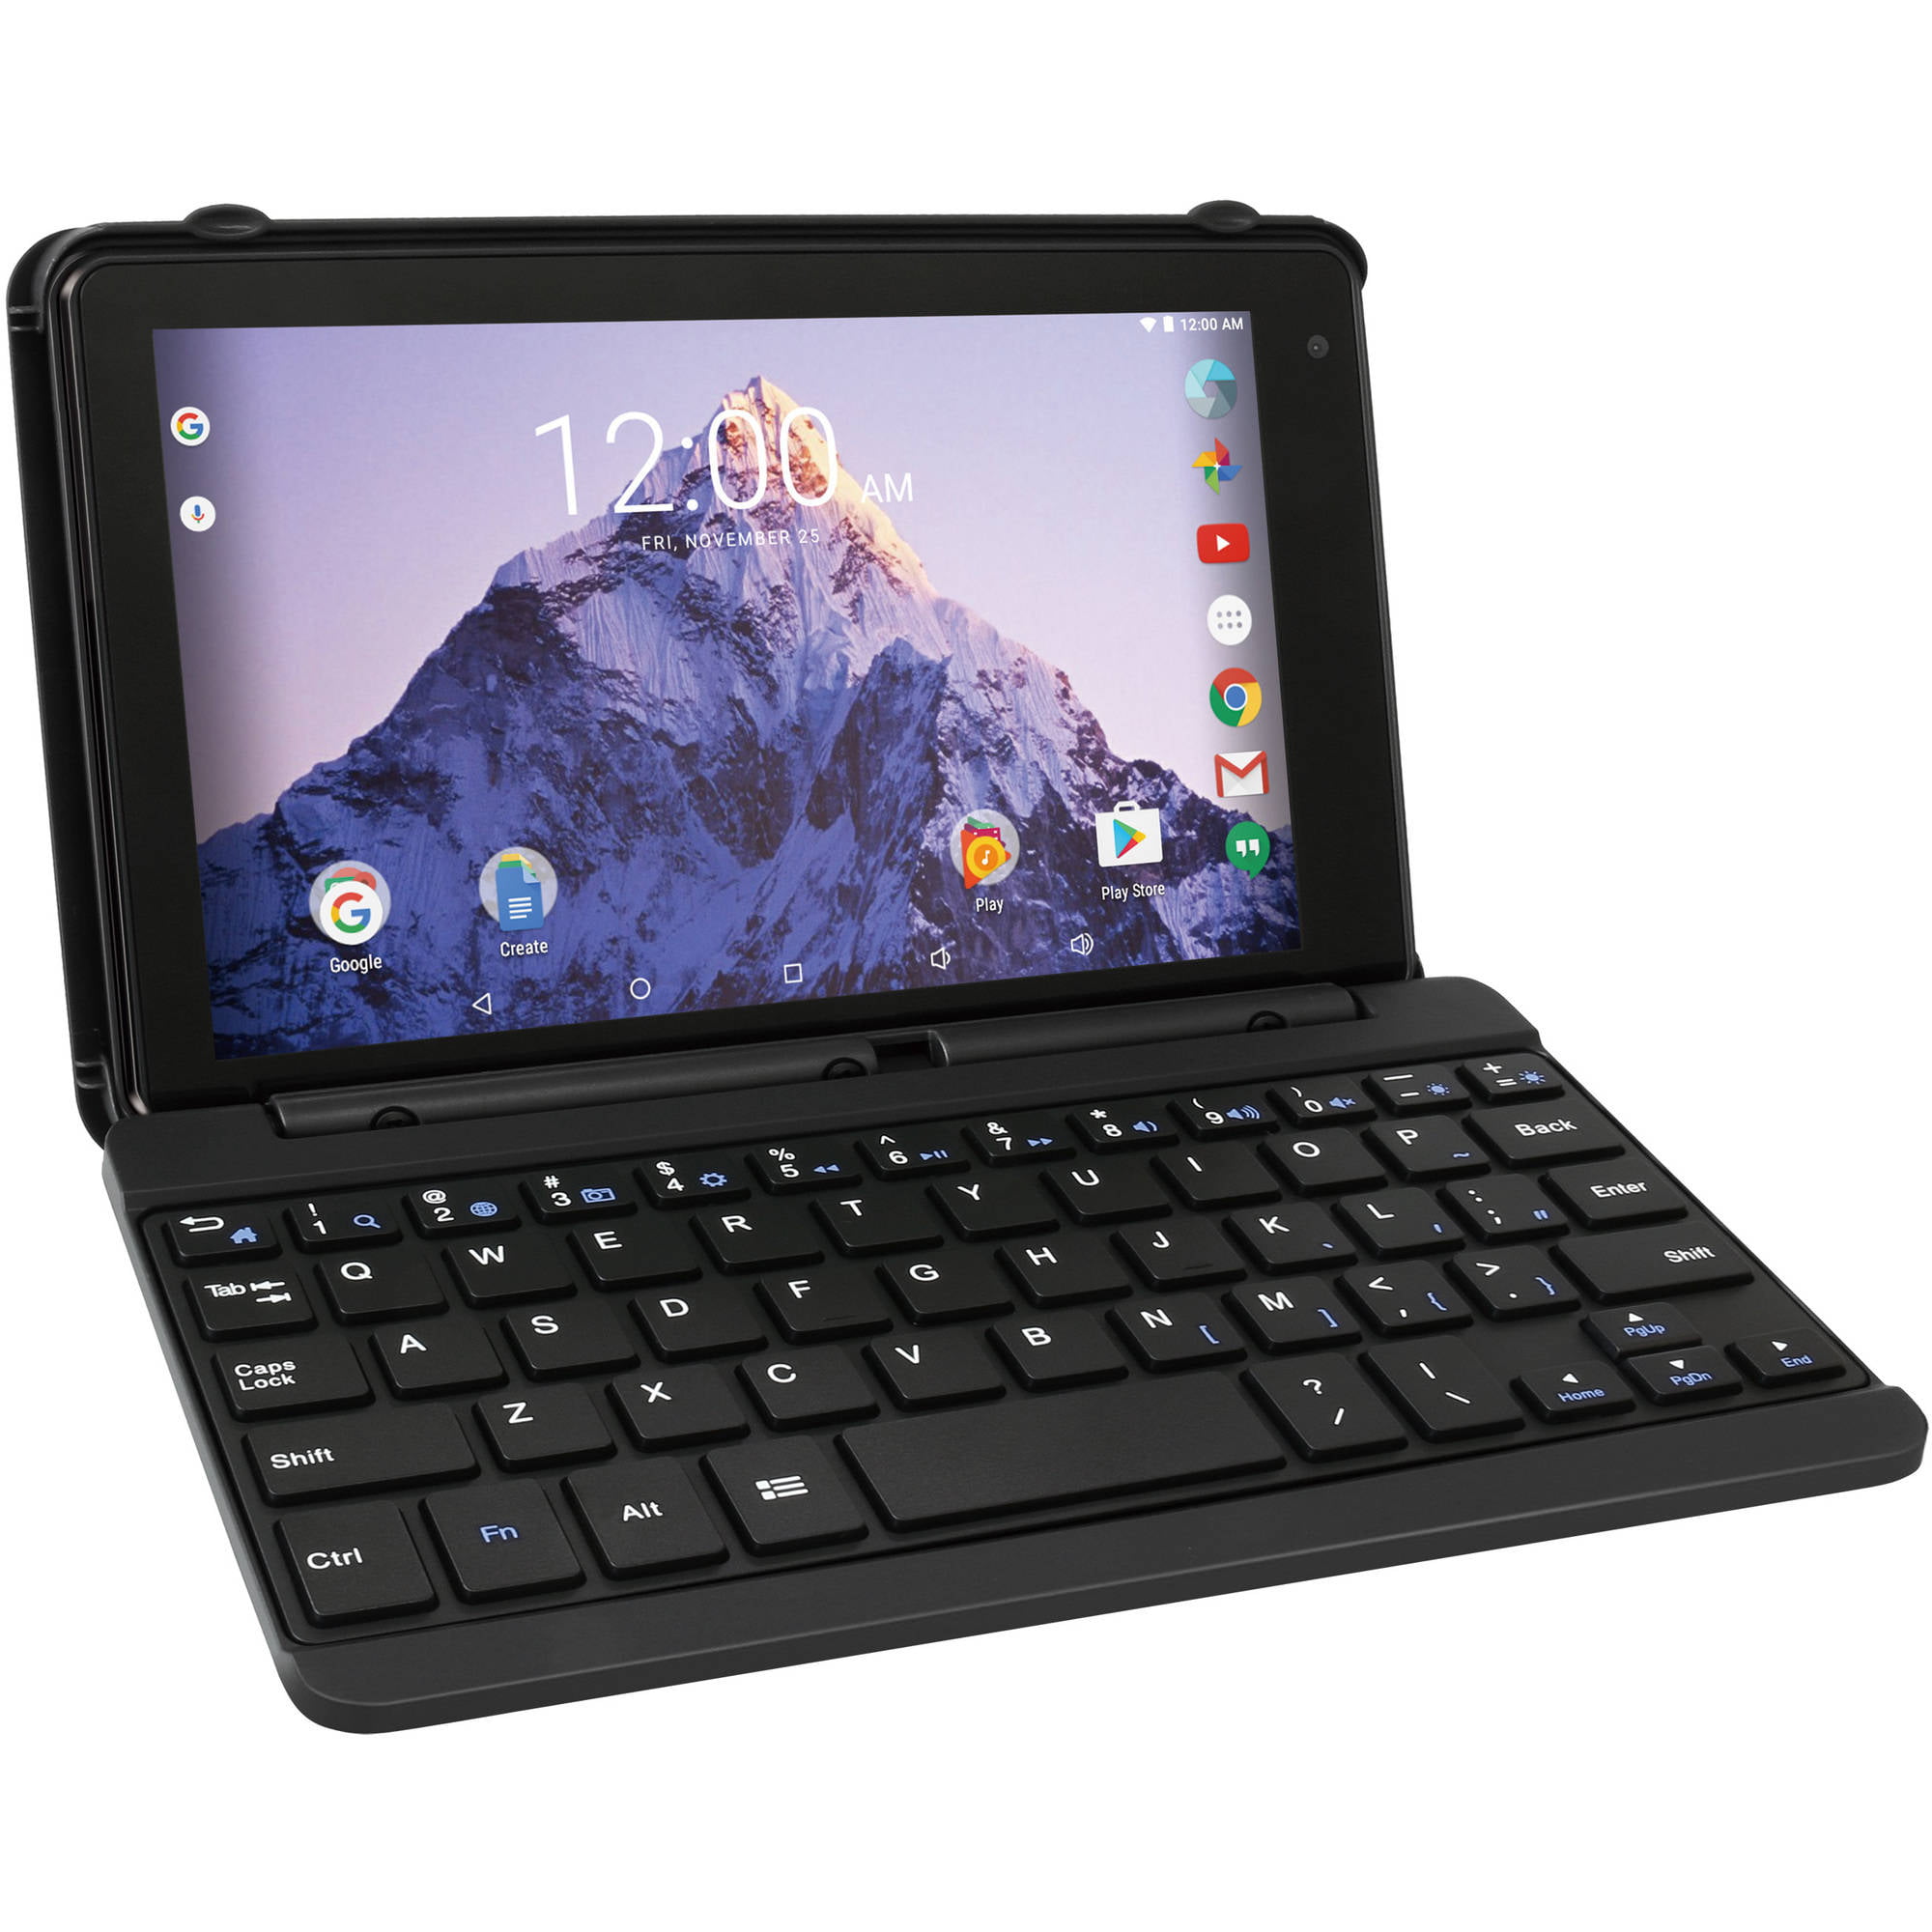 RCA Voyager 7″ 16GB Tablet with Keyboard Case Android 6.0 (Marshmallow)